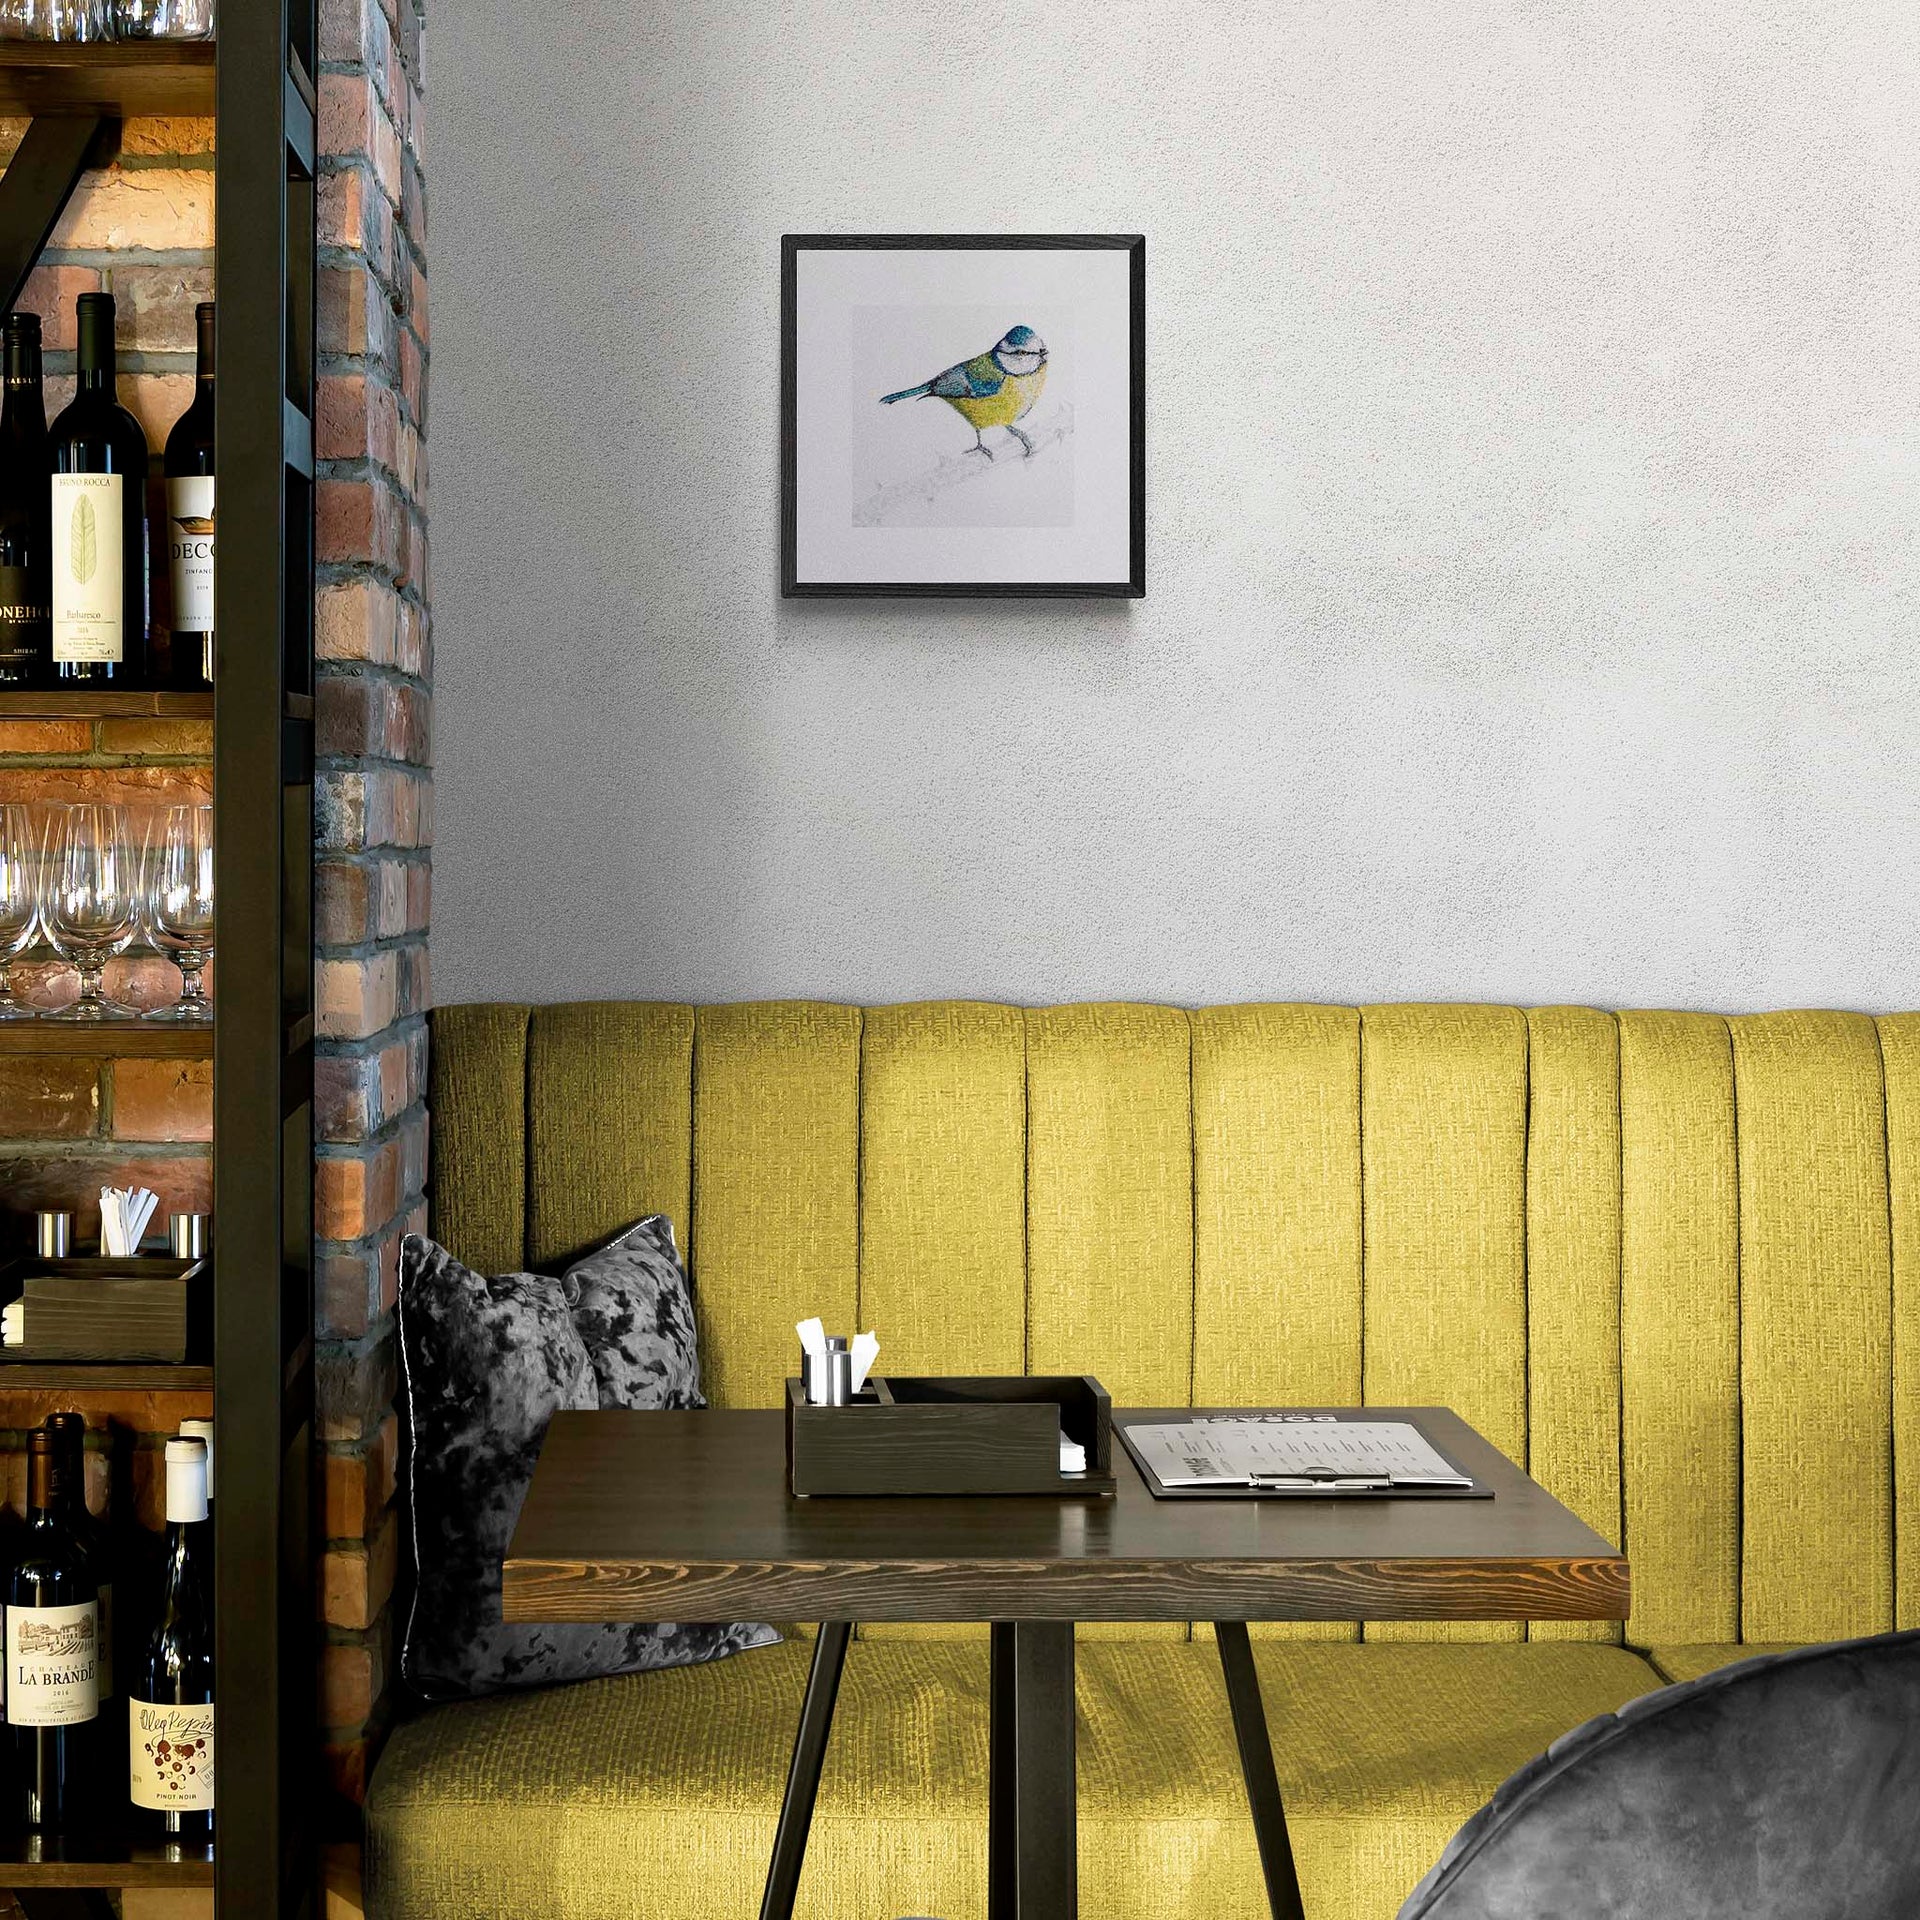 Blue tit hand embroidery limited edition print in frame on the wall